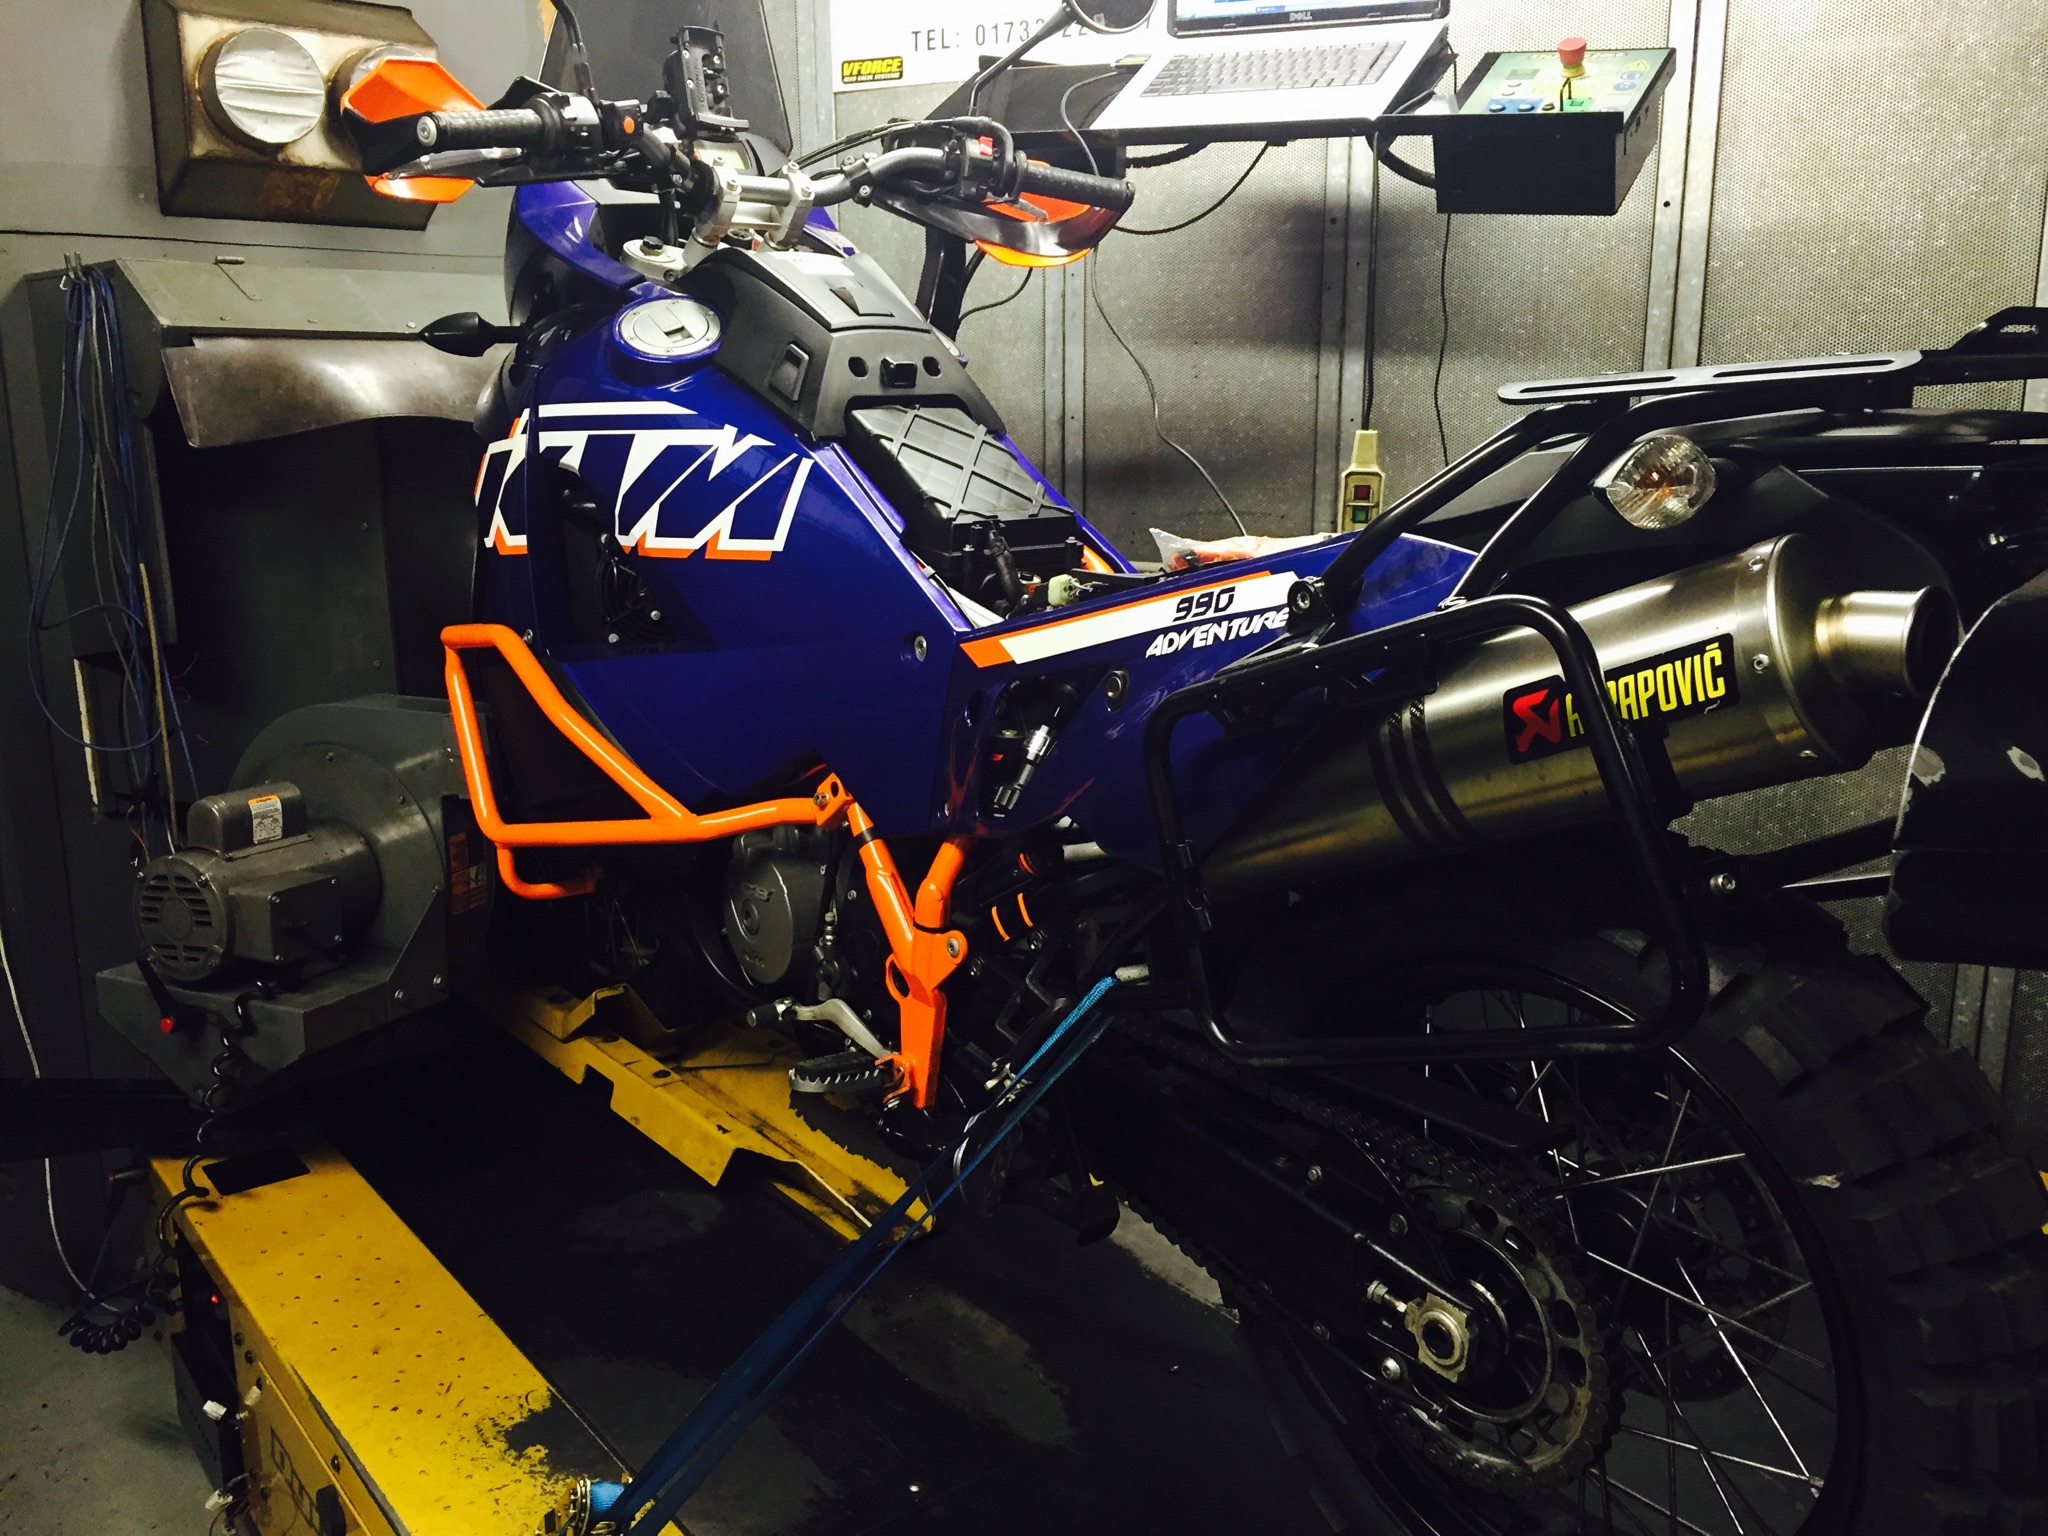 KTM 990 Adventure ECU remap – an owner emails his thoughts